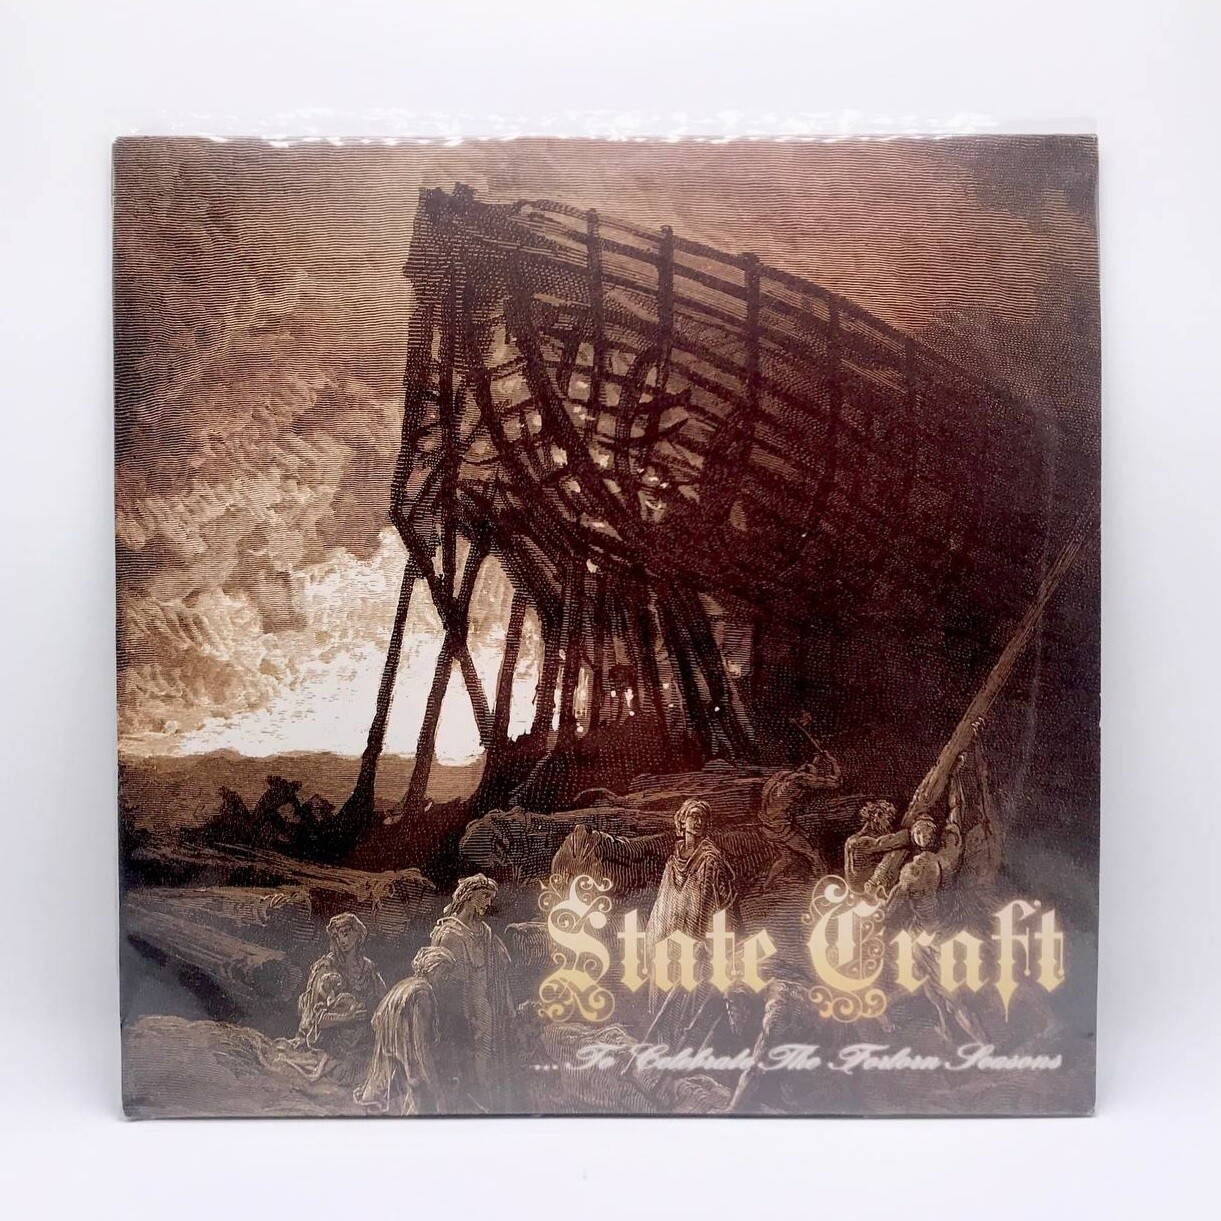 [USED] STATE CRAFT -TO CELEBRATE THE FORLORN SEASONS- LP